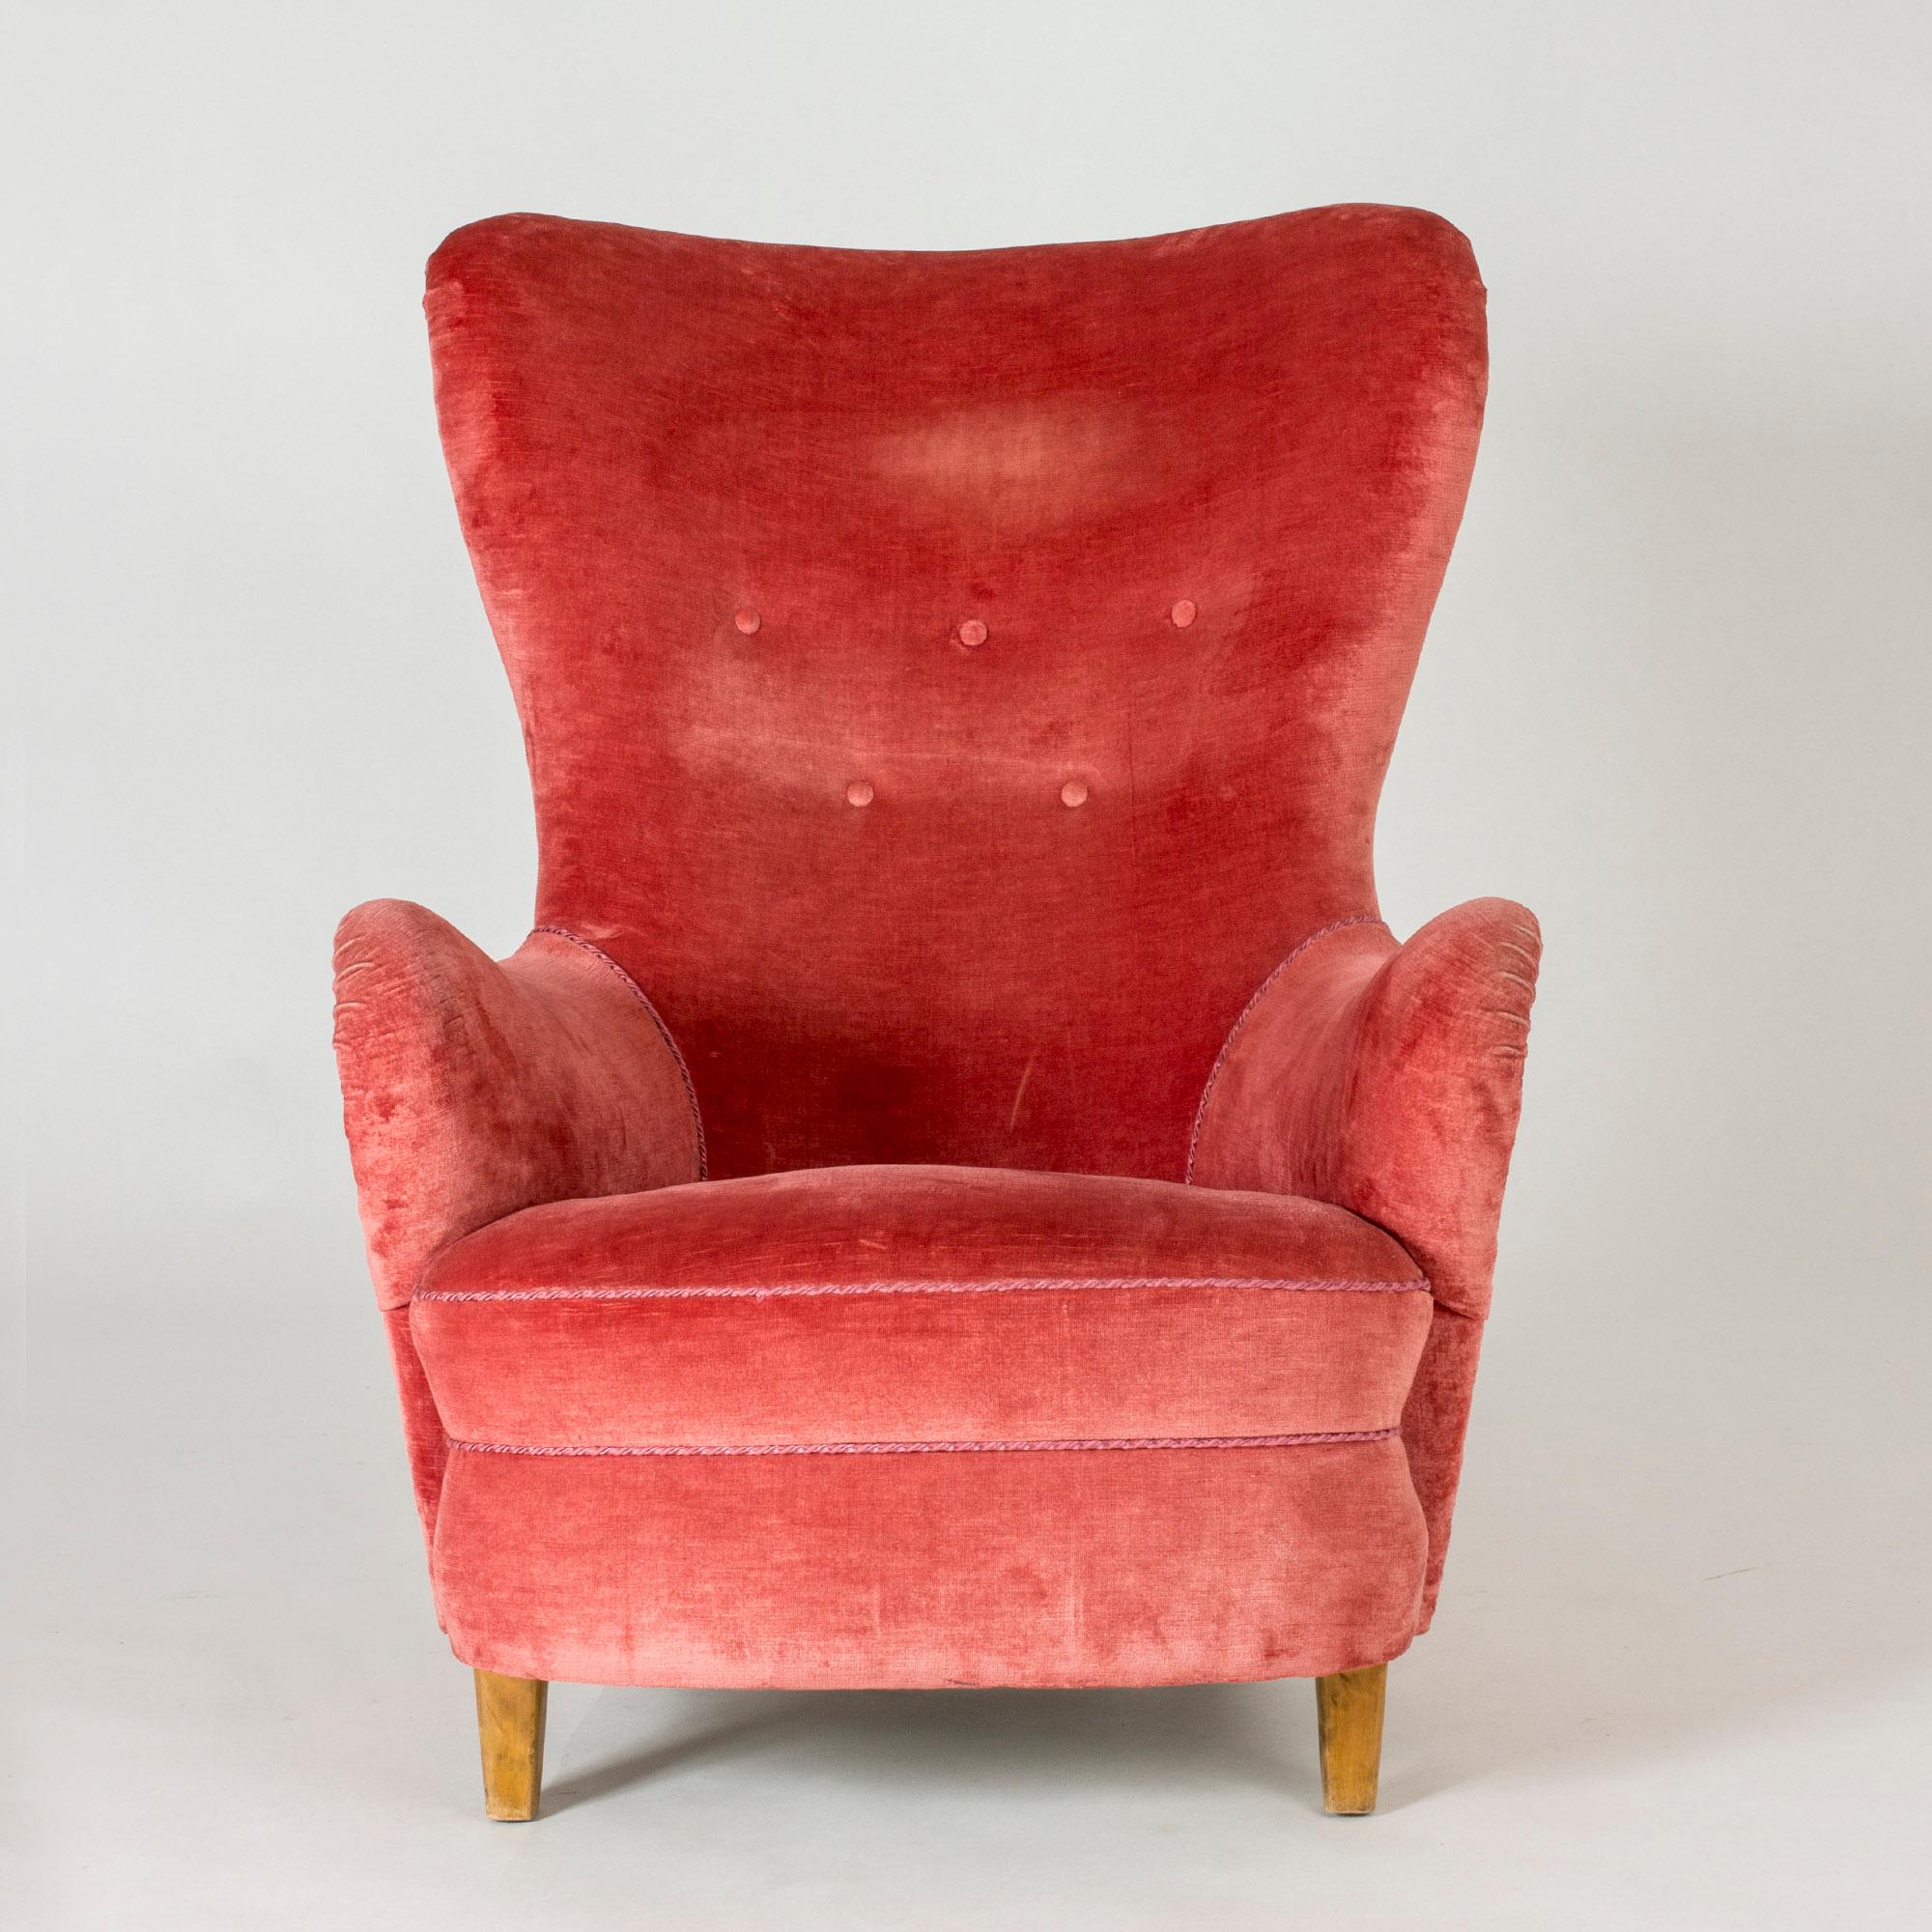 Swedish midcentury wingback lounge chair. Beautiful design with generous curves. Original upholstery in vibrant pink velvet.